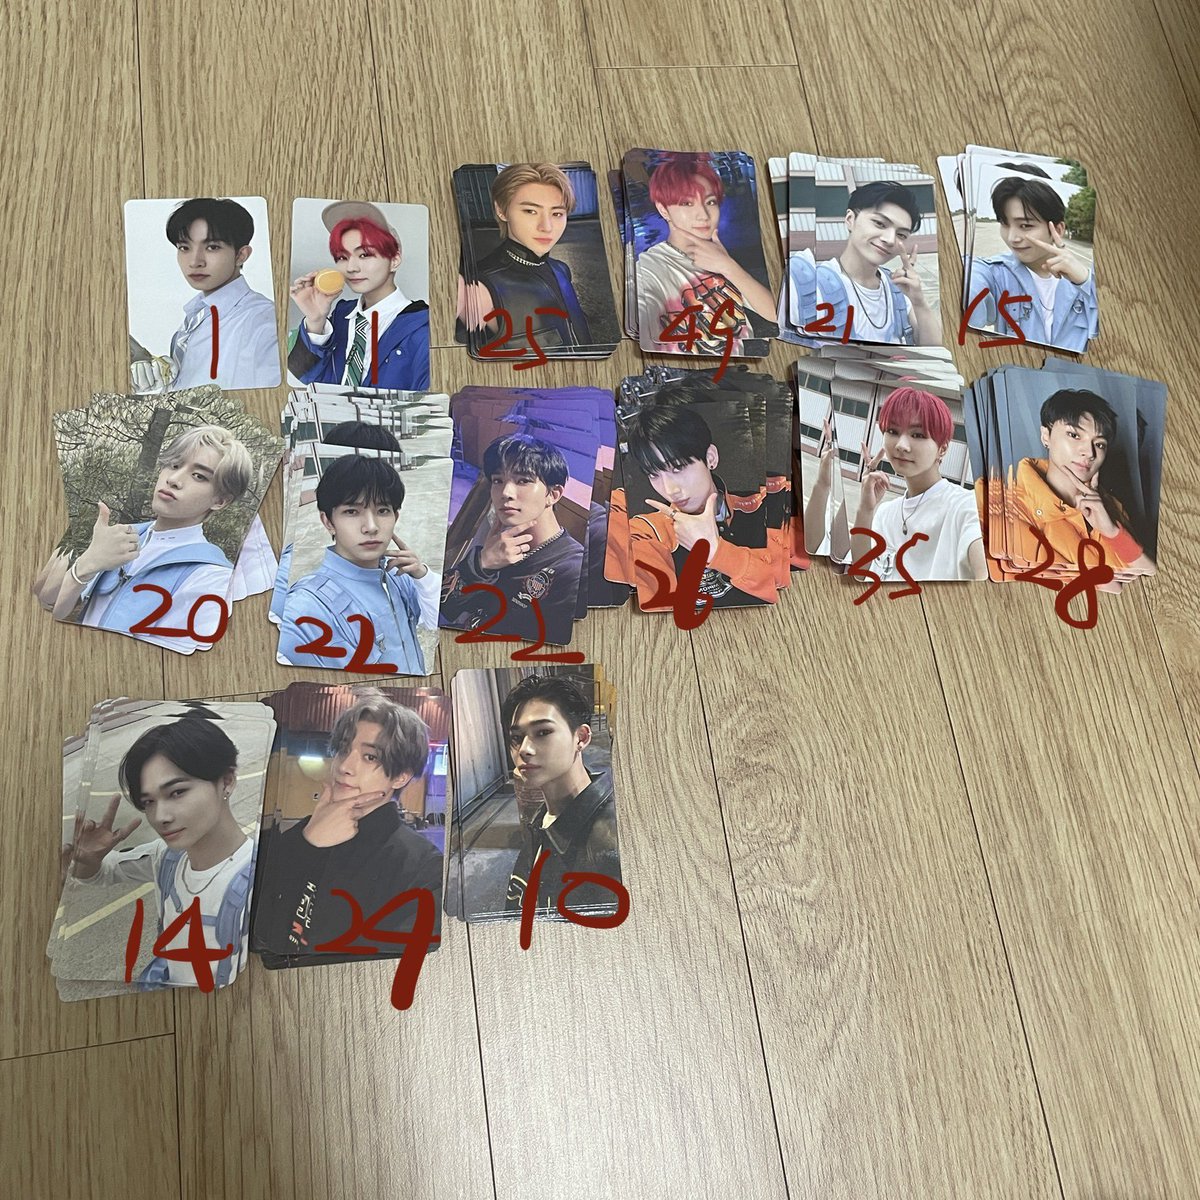 wts lfb ph  ✭  enhypen pcs

₱80 each ( all-in )

・tingi ! payo once all are taken
・from yd feta

rcbyt: simjayki.carrd.co

only reply to claim  .